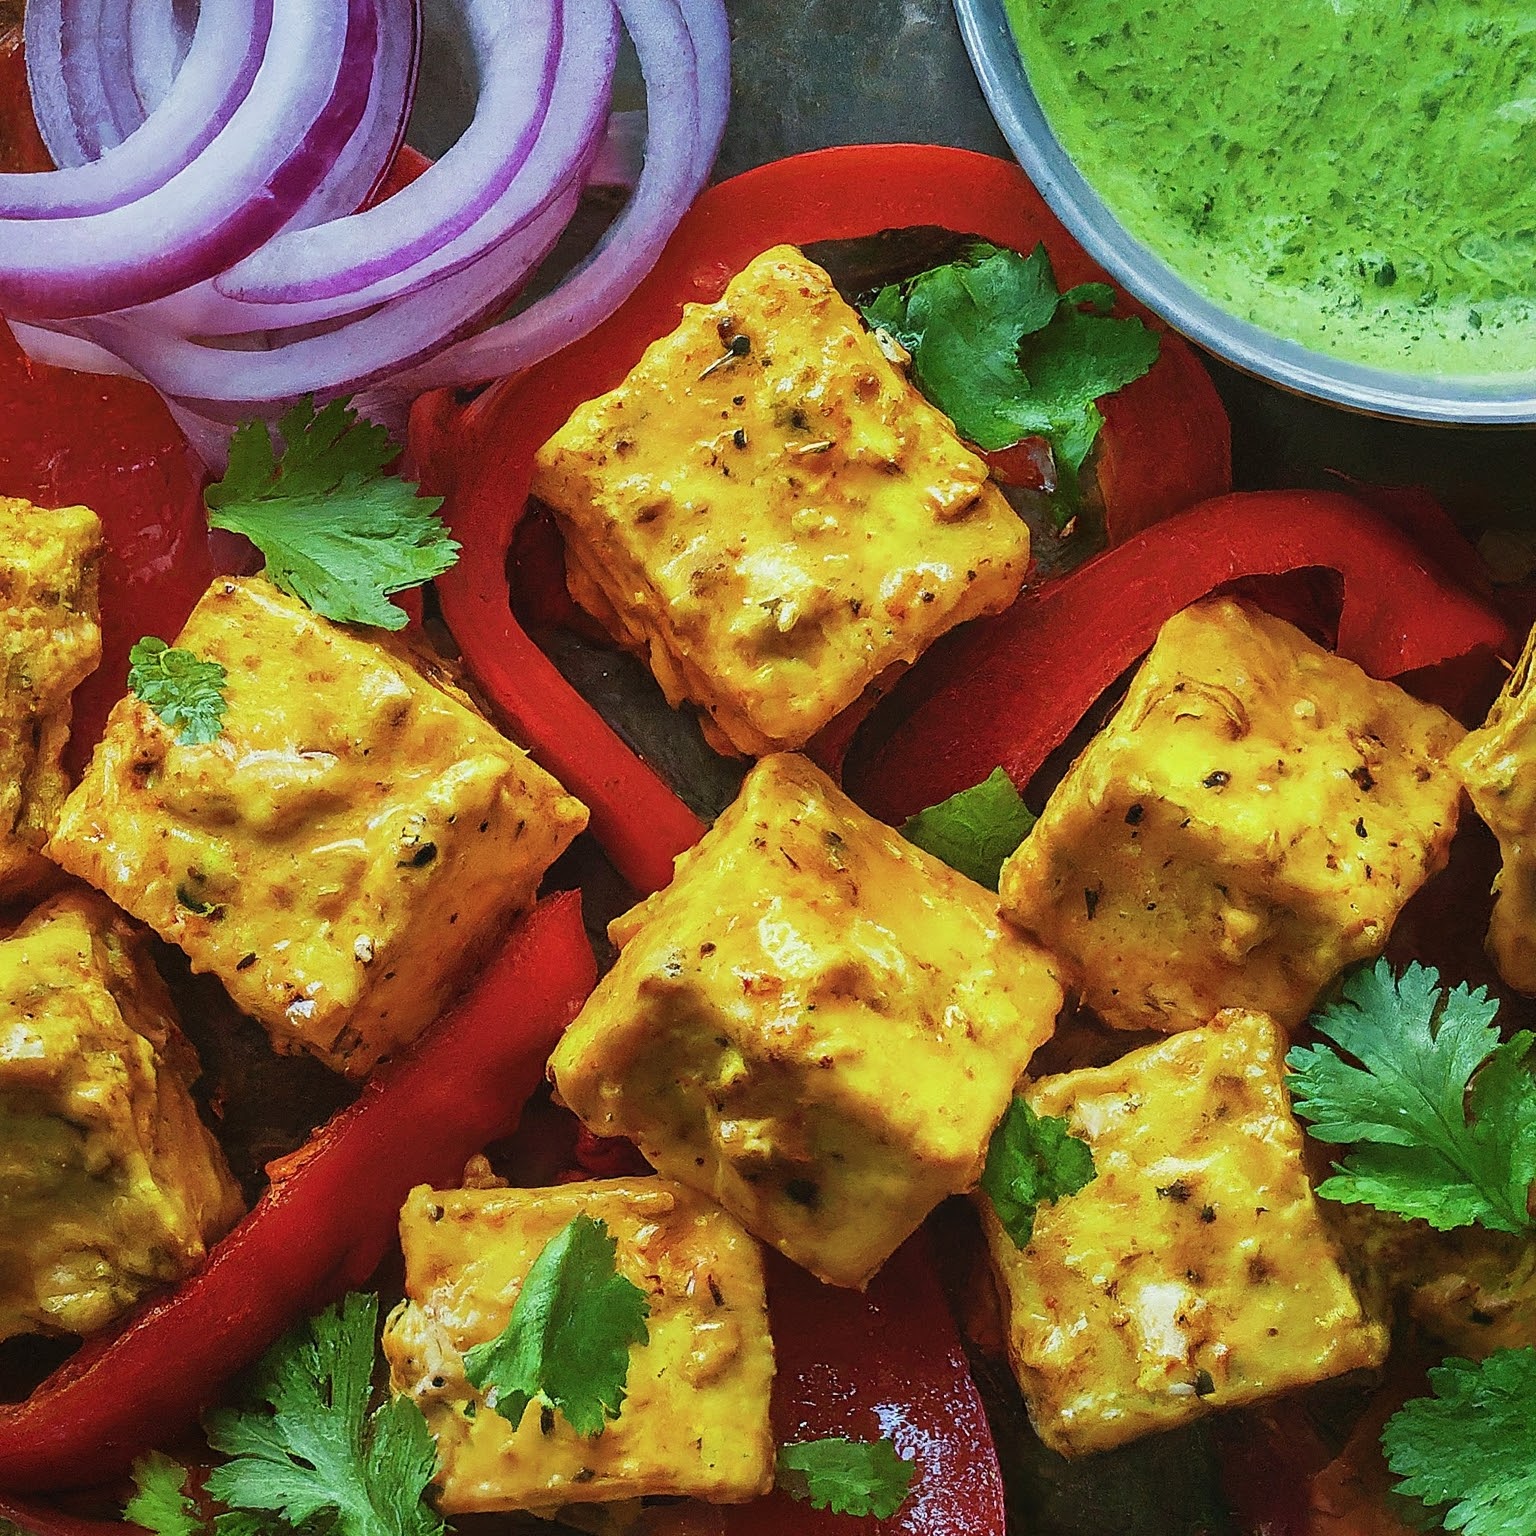 Platter of colourful Yogurt and Spice-marinated Paneer Cubes with vegetables and mint chutney.